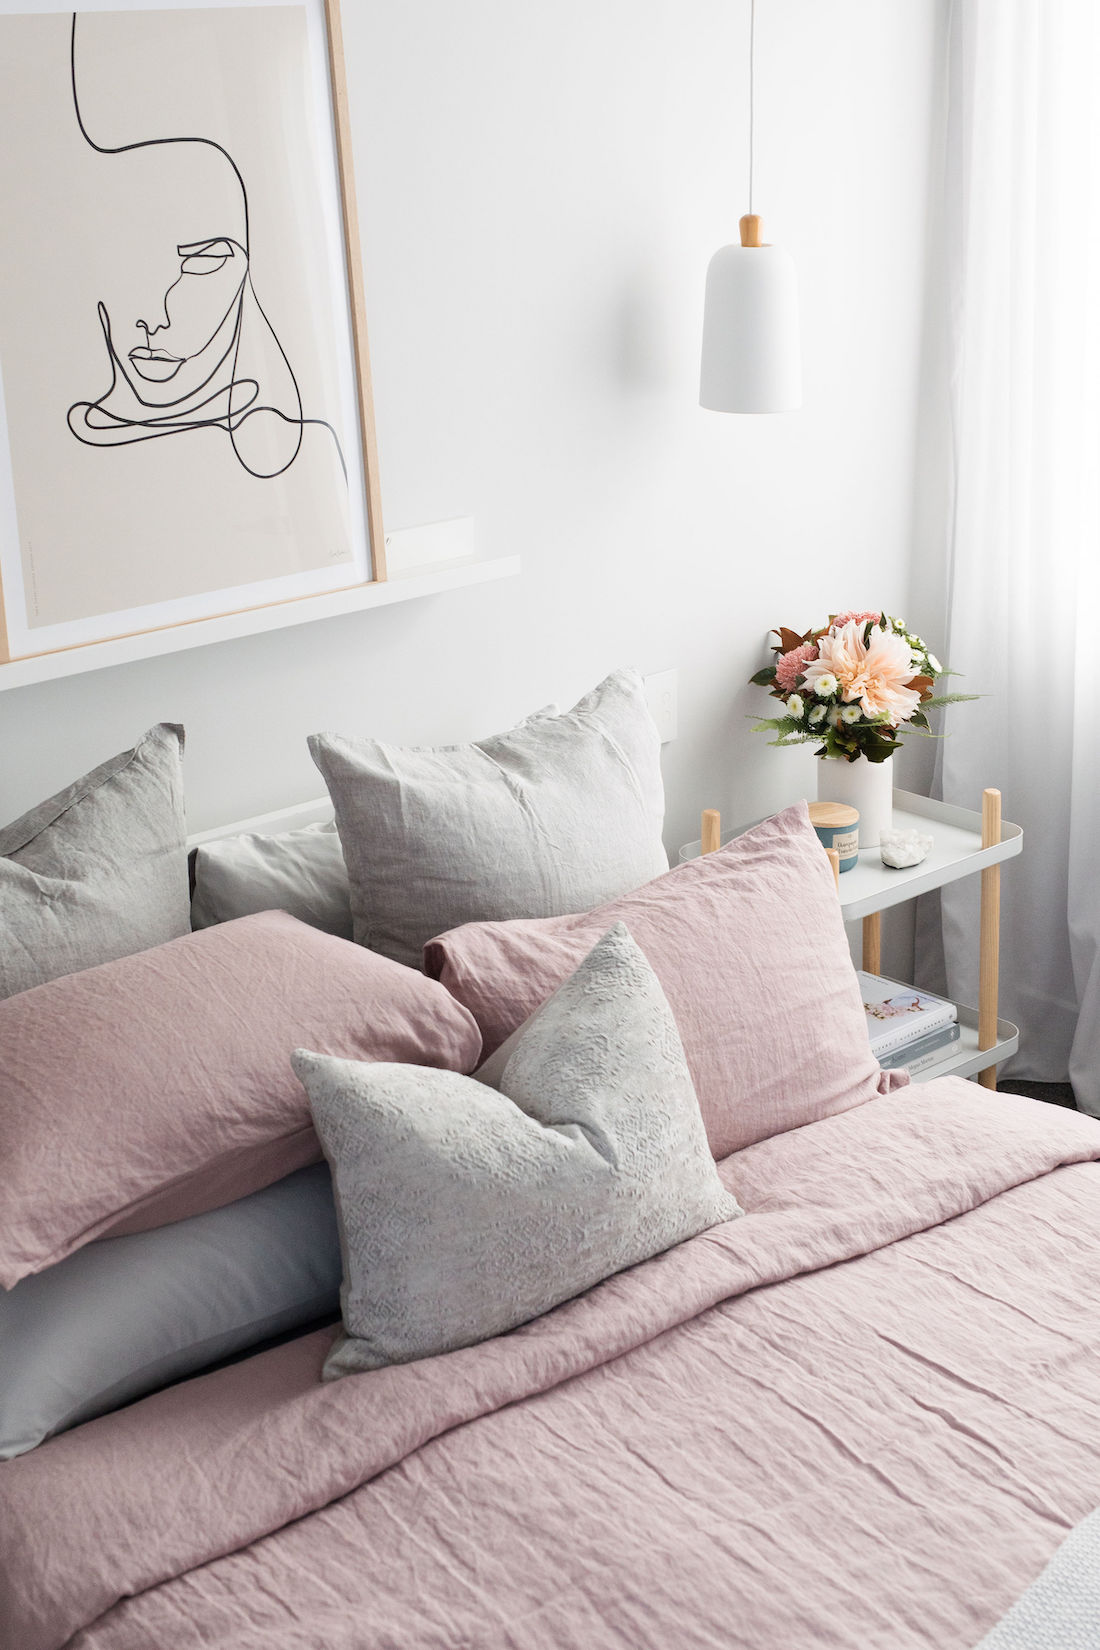 Dusty rose bedding and grey cushions